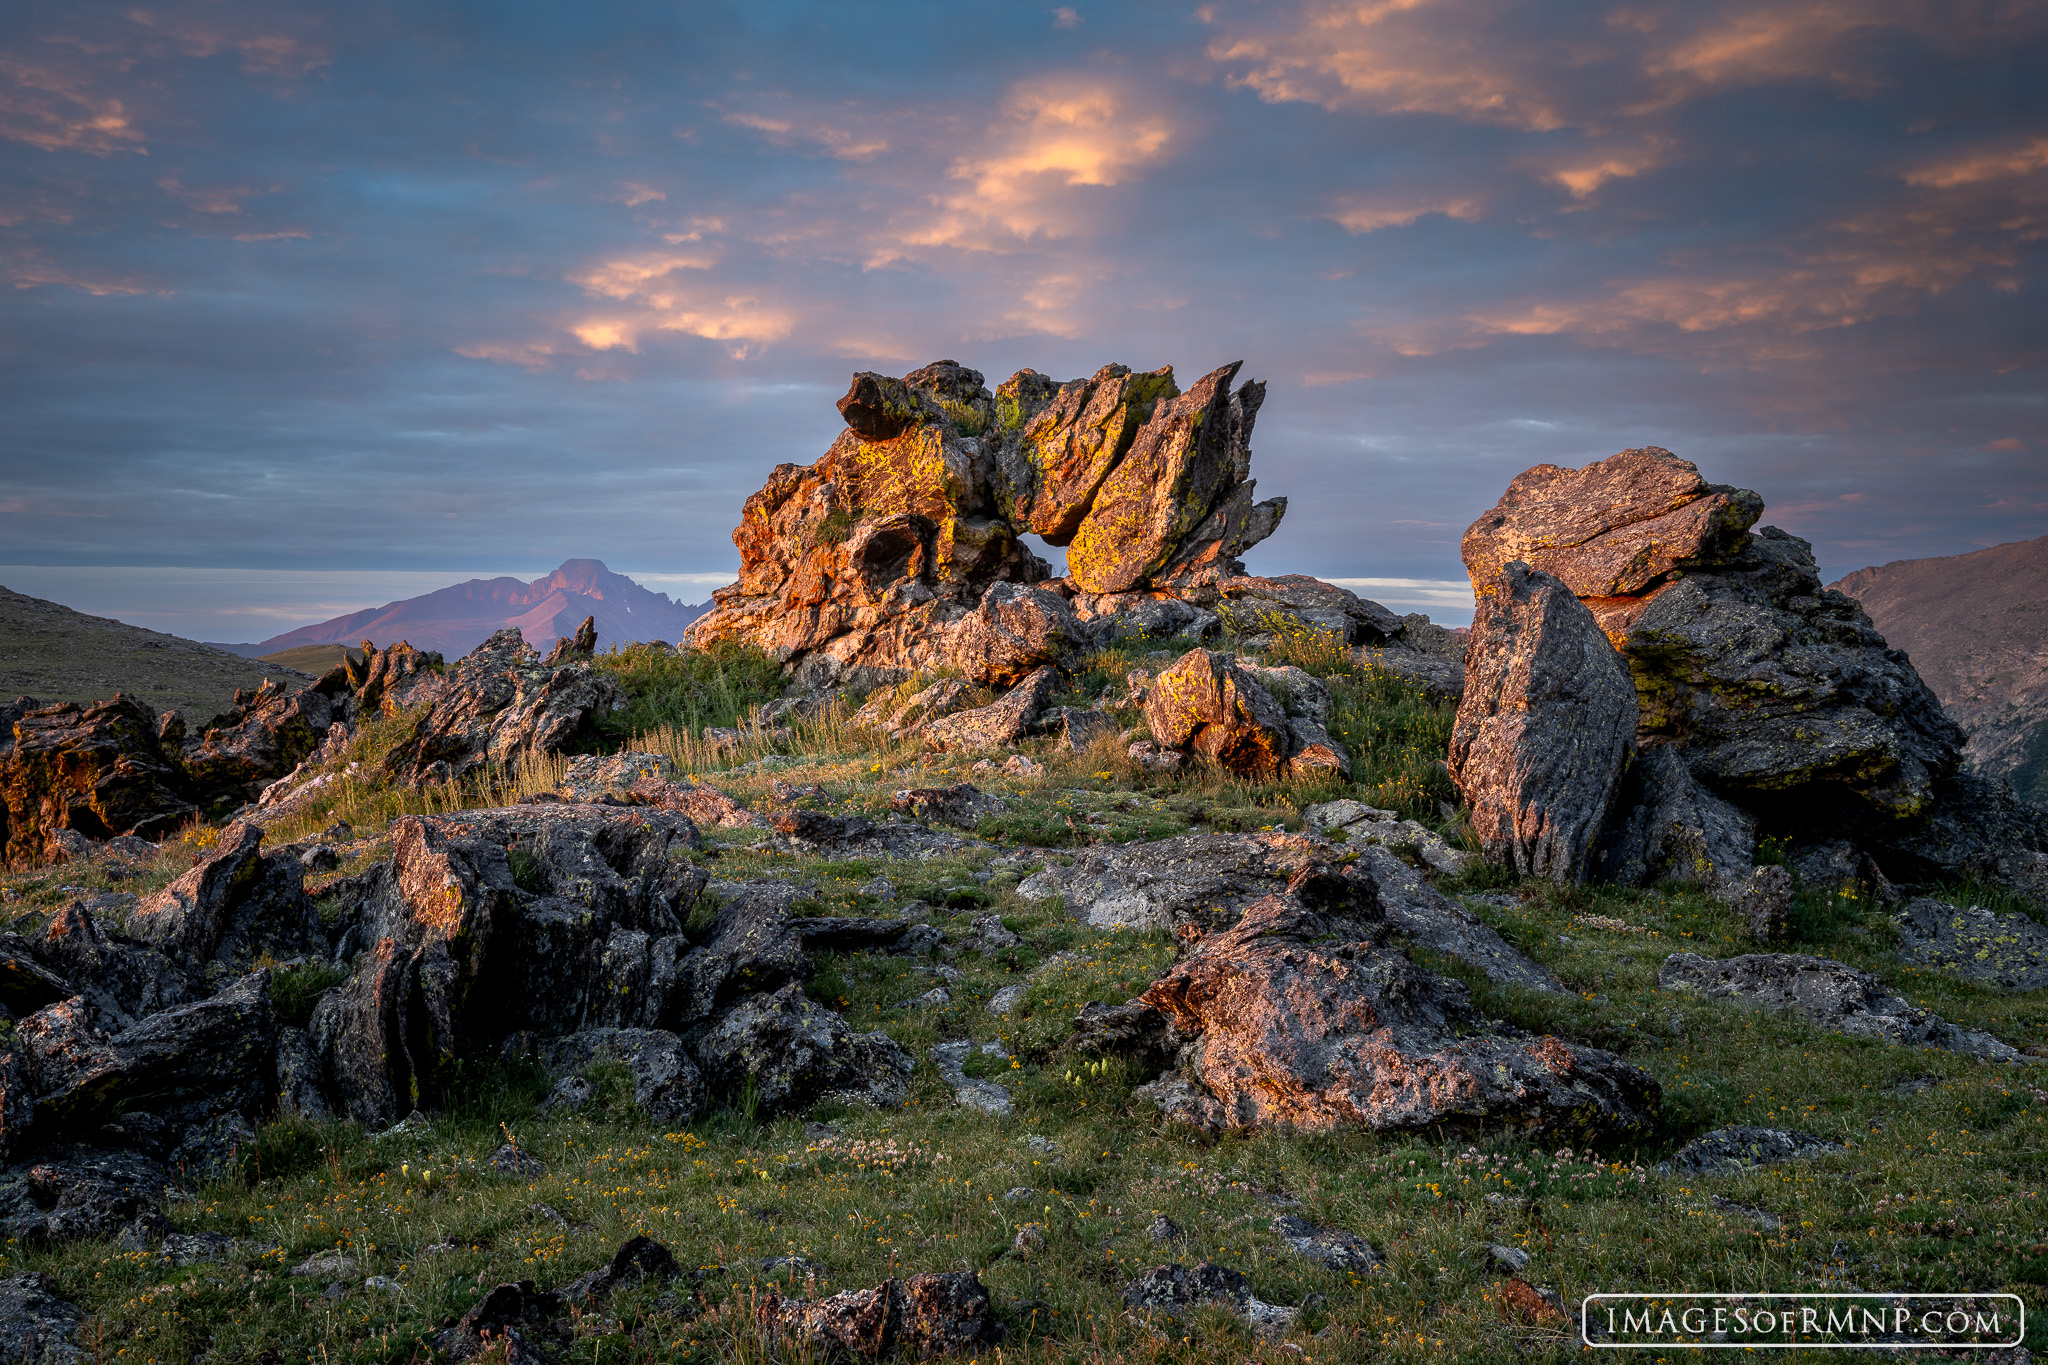 High in the tundra of Rocky Mountain National Park, the rising sun briefly breaks through the clouds and illuminates rocks on...